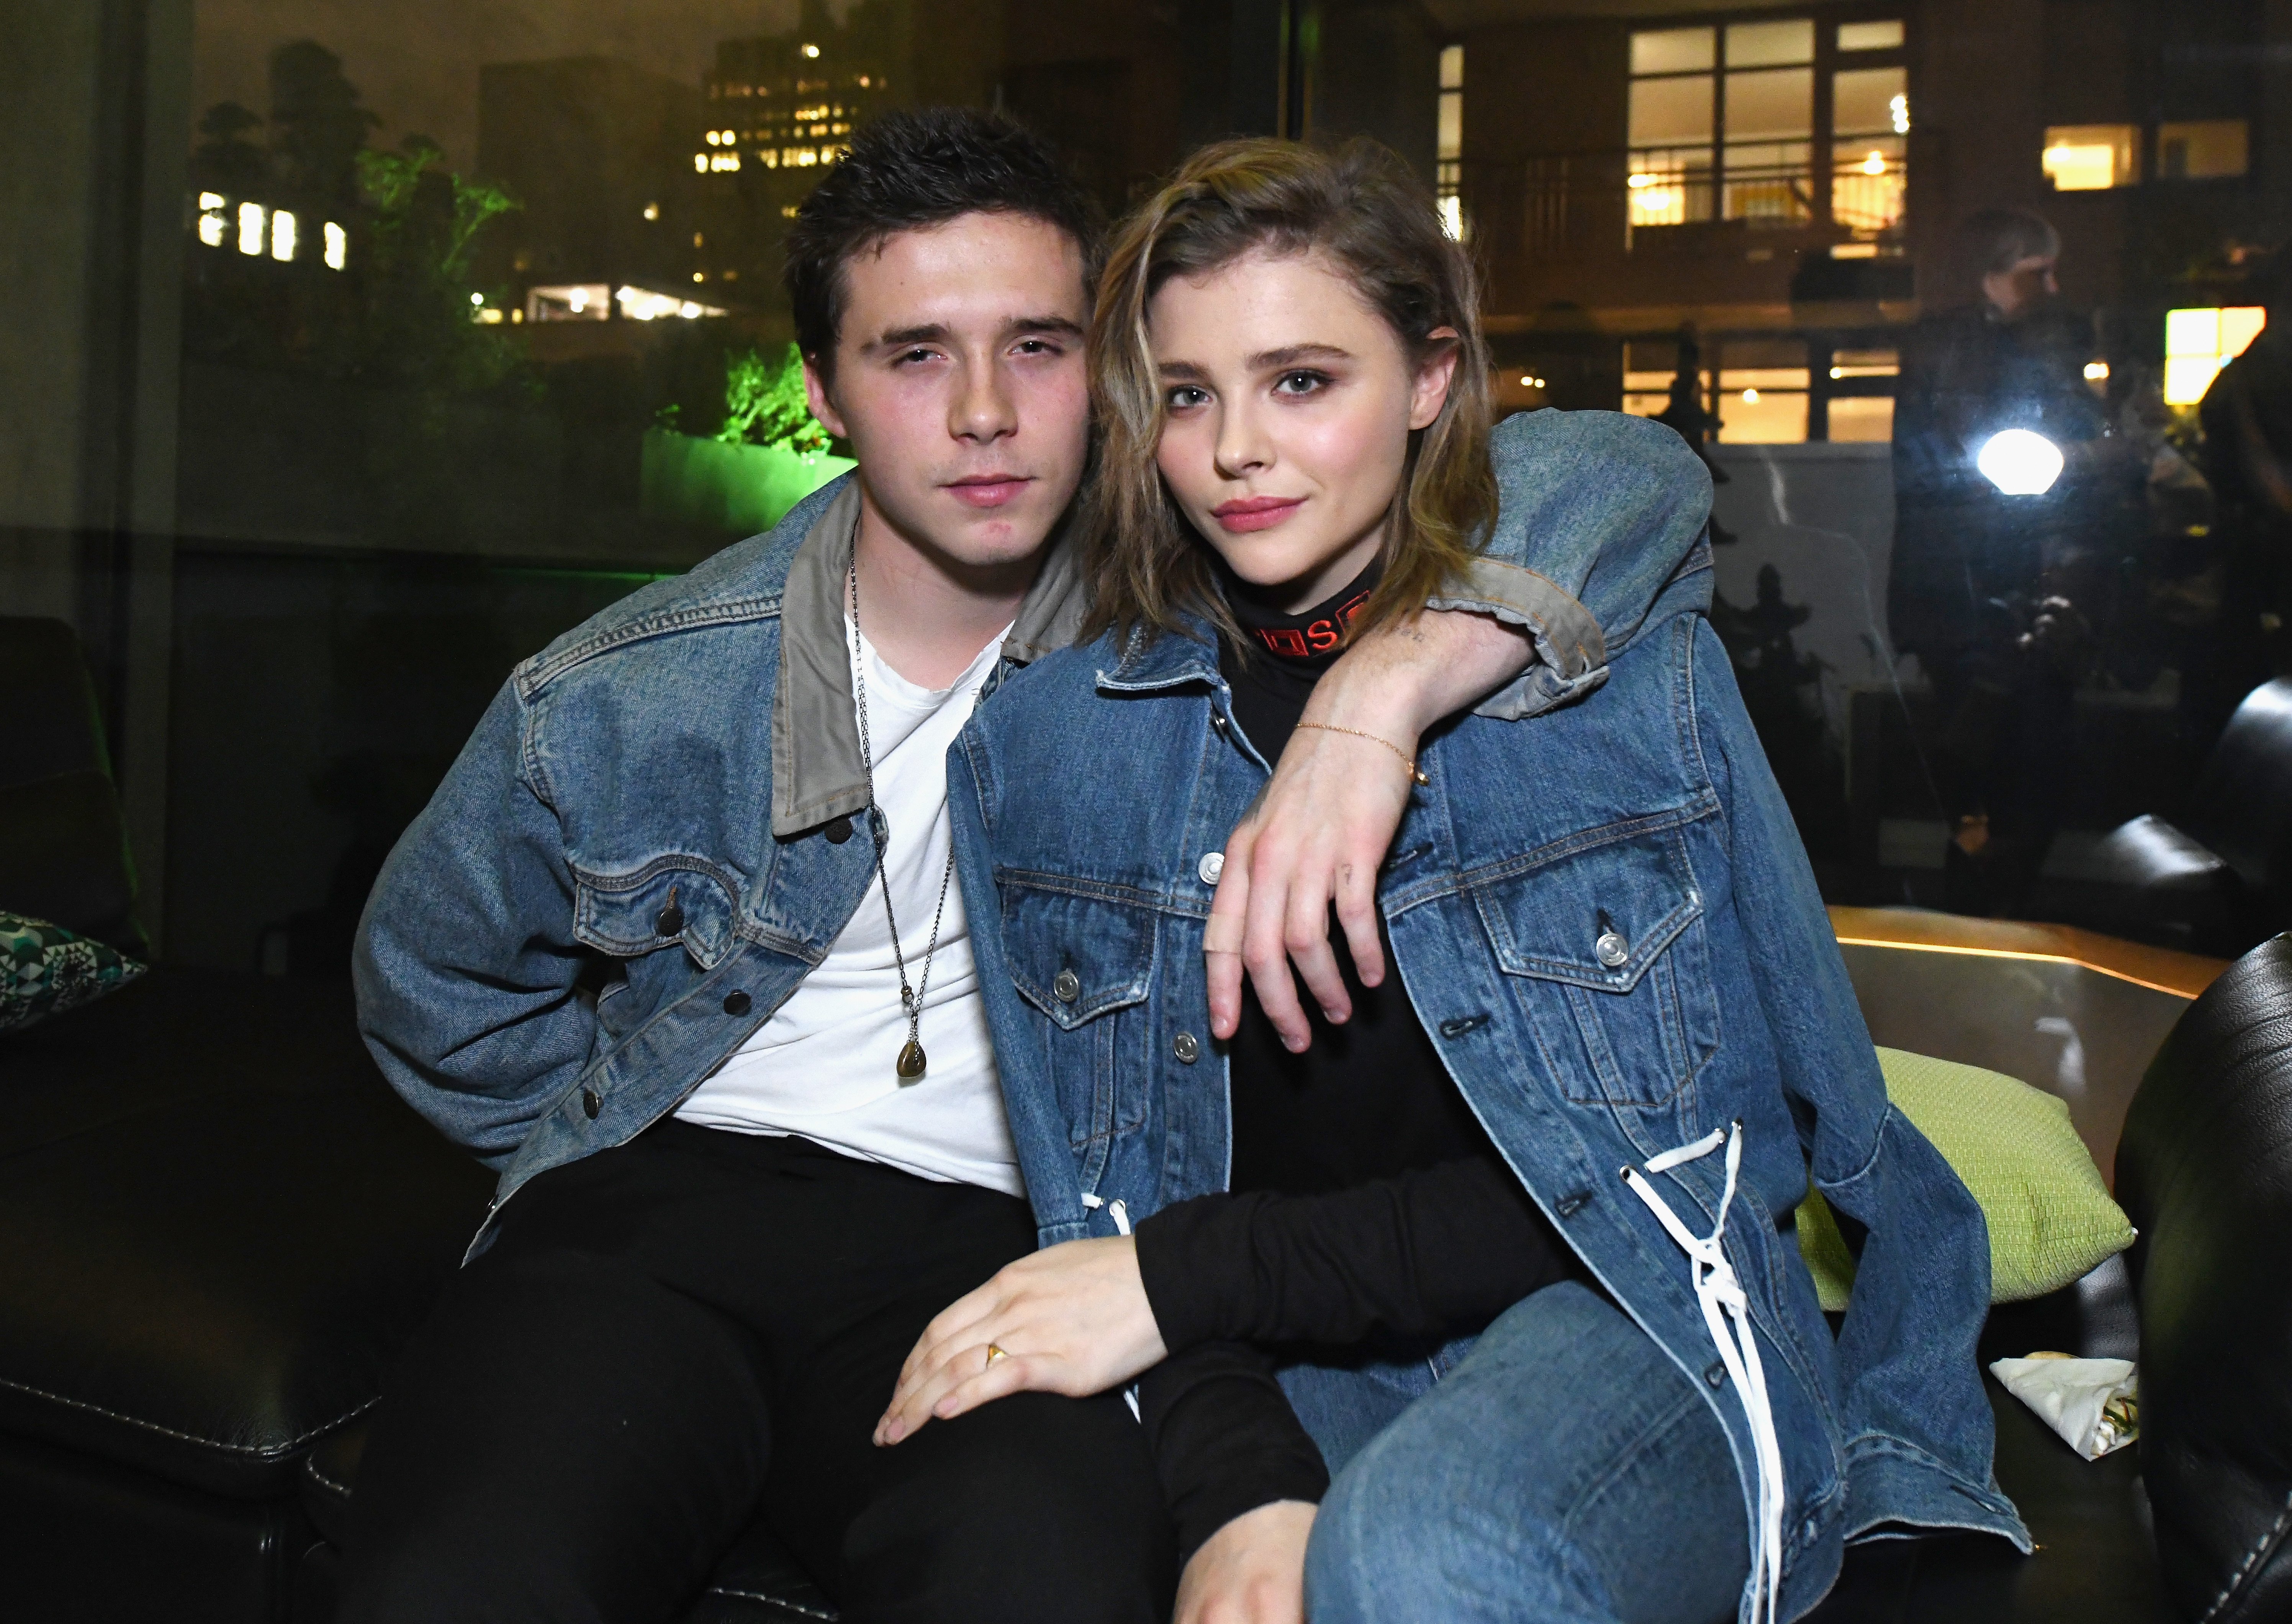 Brooklyn Beckham and Chloë Grace Moretz at the Xbox Live Session in New York on November 6, 2017 | Source: Getty Images